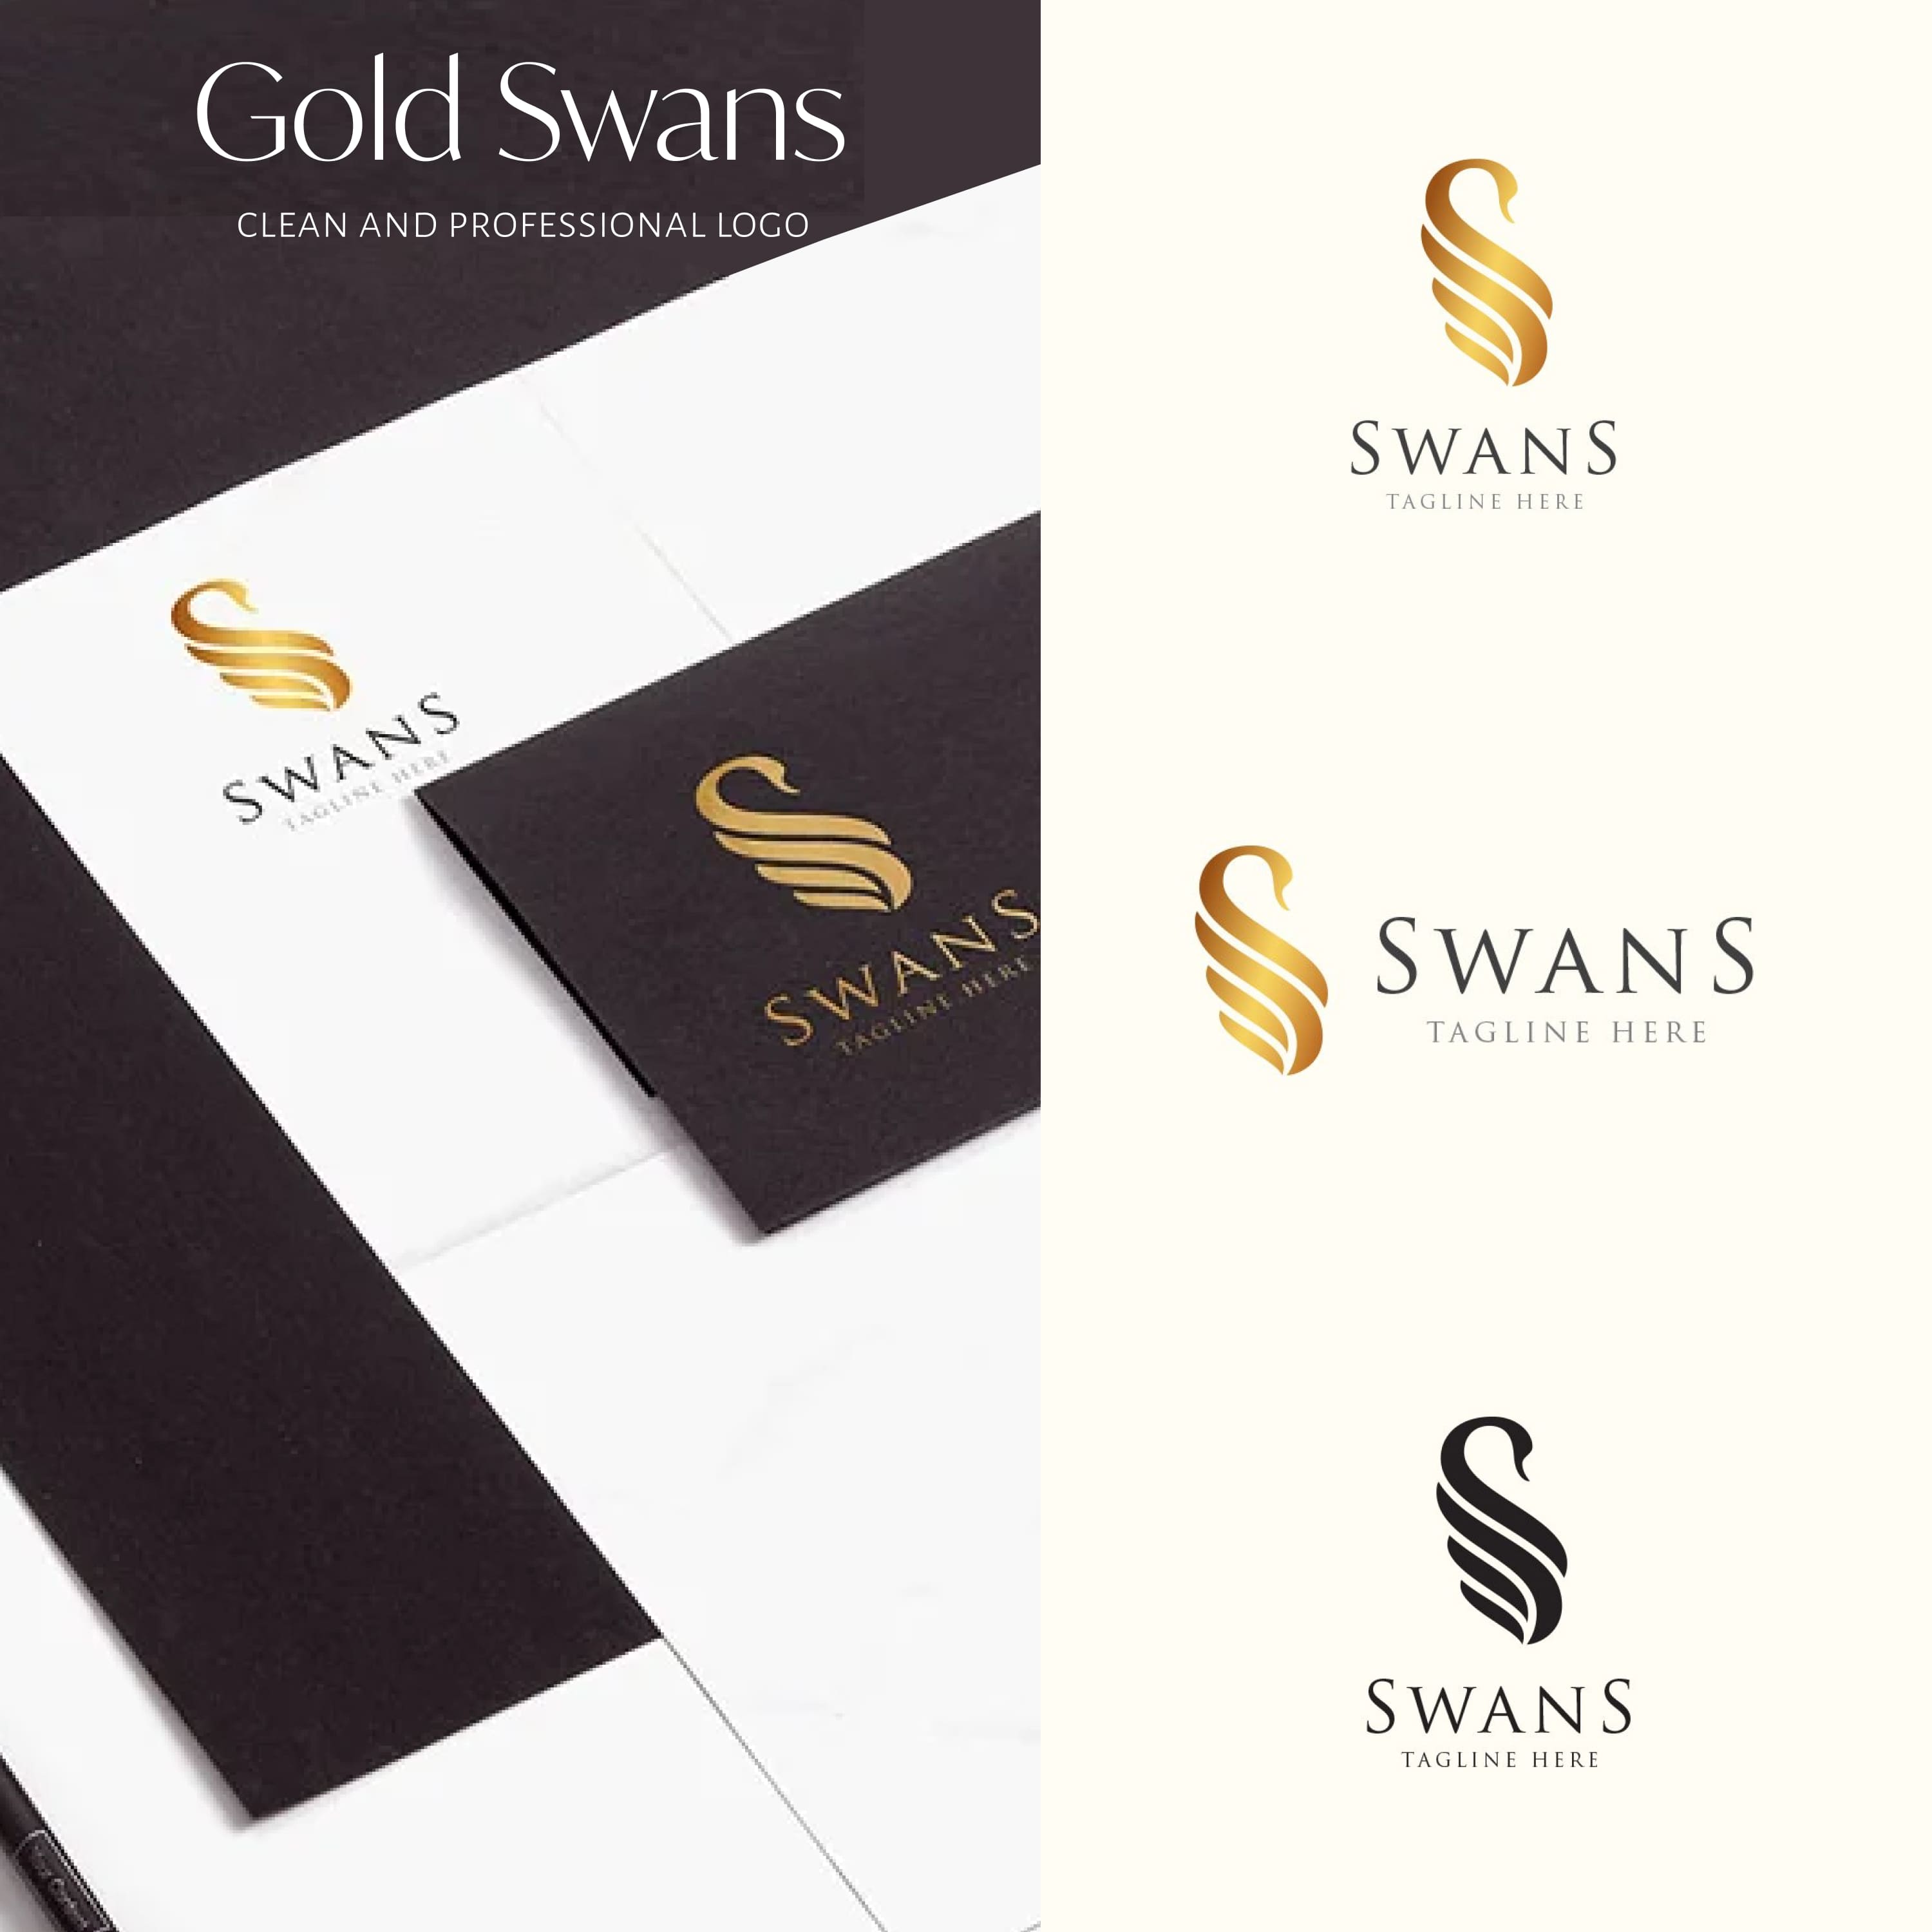 Gold Swans cover.